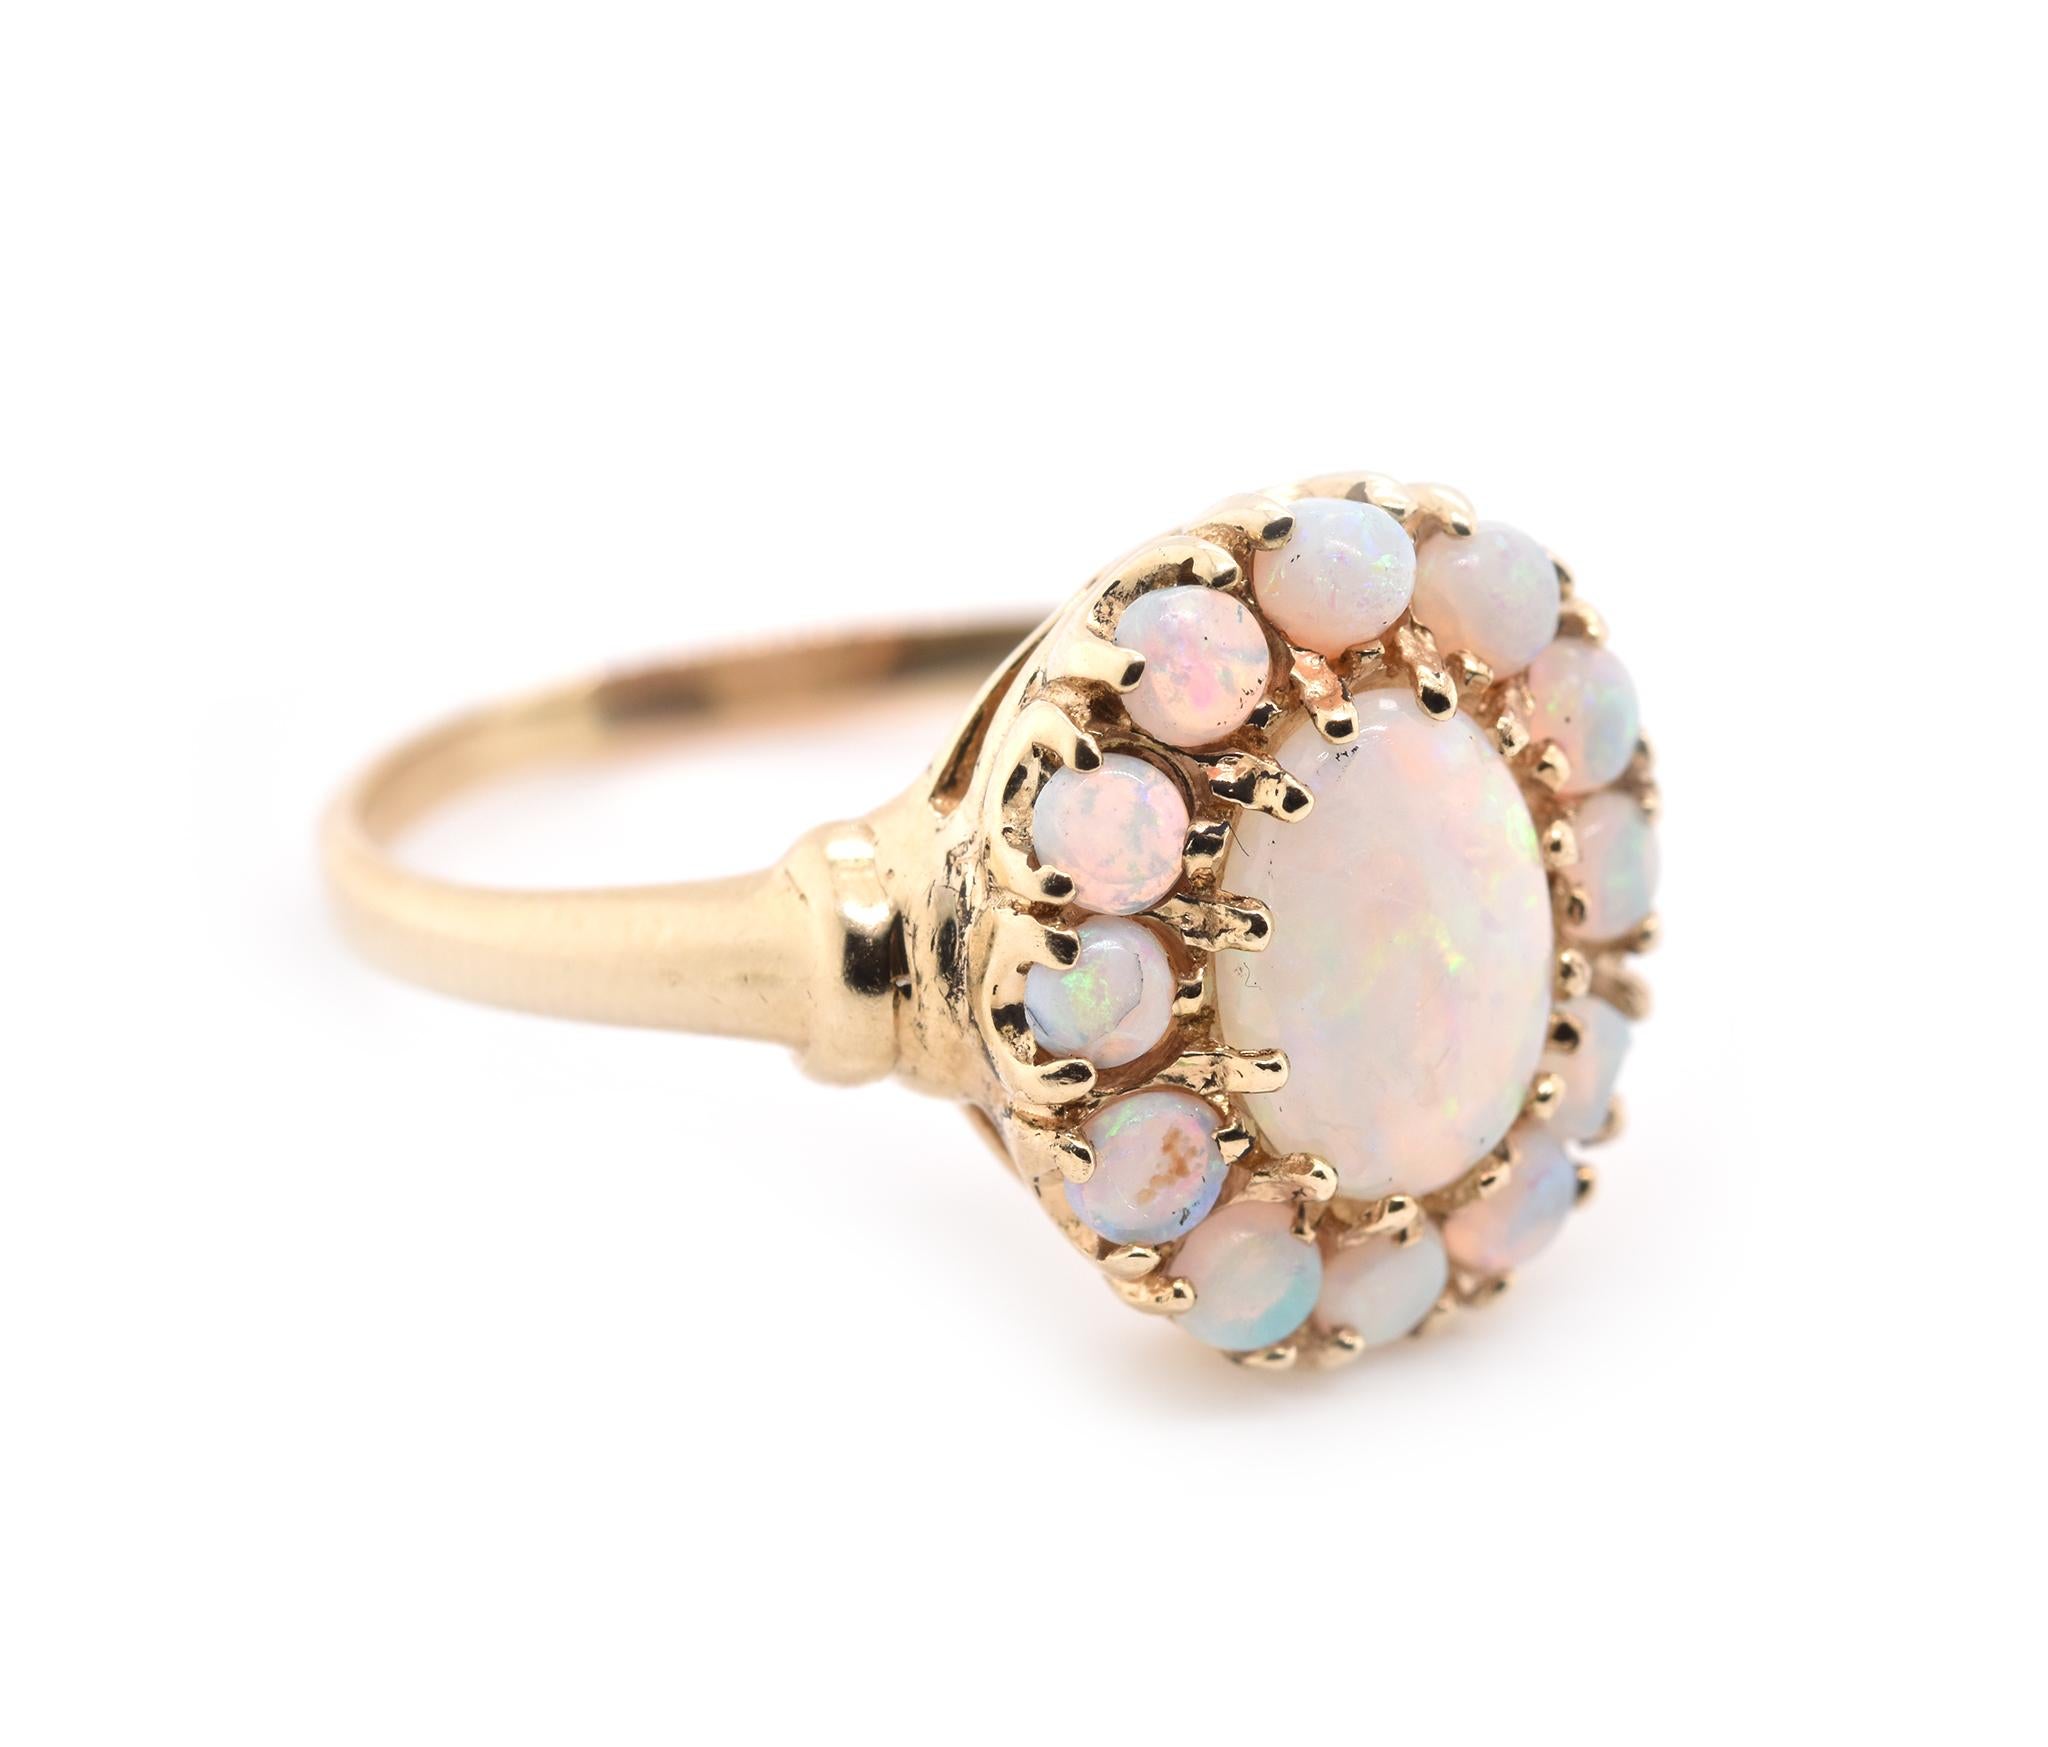 Material: 10k yellow gold
Ring size: 8 (please allow two additional shipping days for sizing requests)
Dimensions: ring is approximately 24.20mm by 20.47mm
Weight: 2.8 grams
